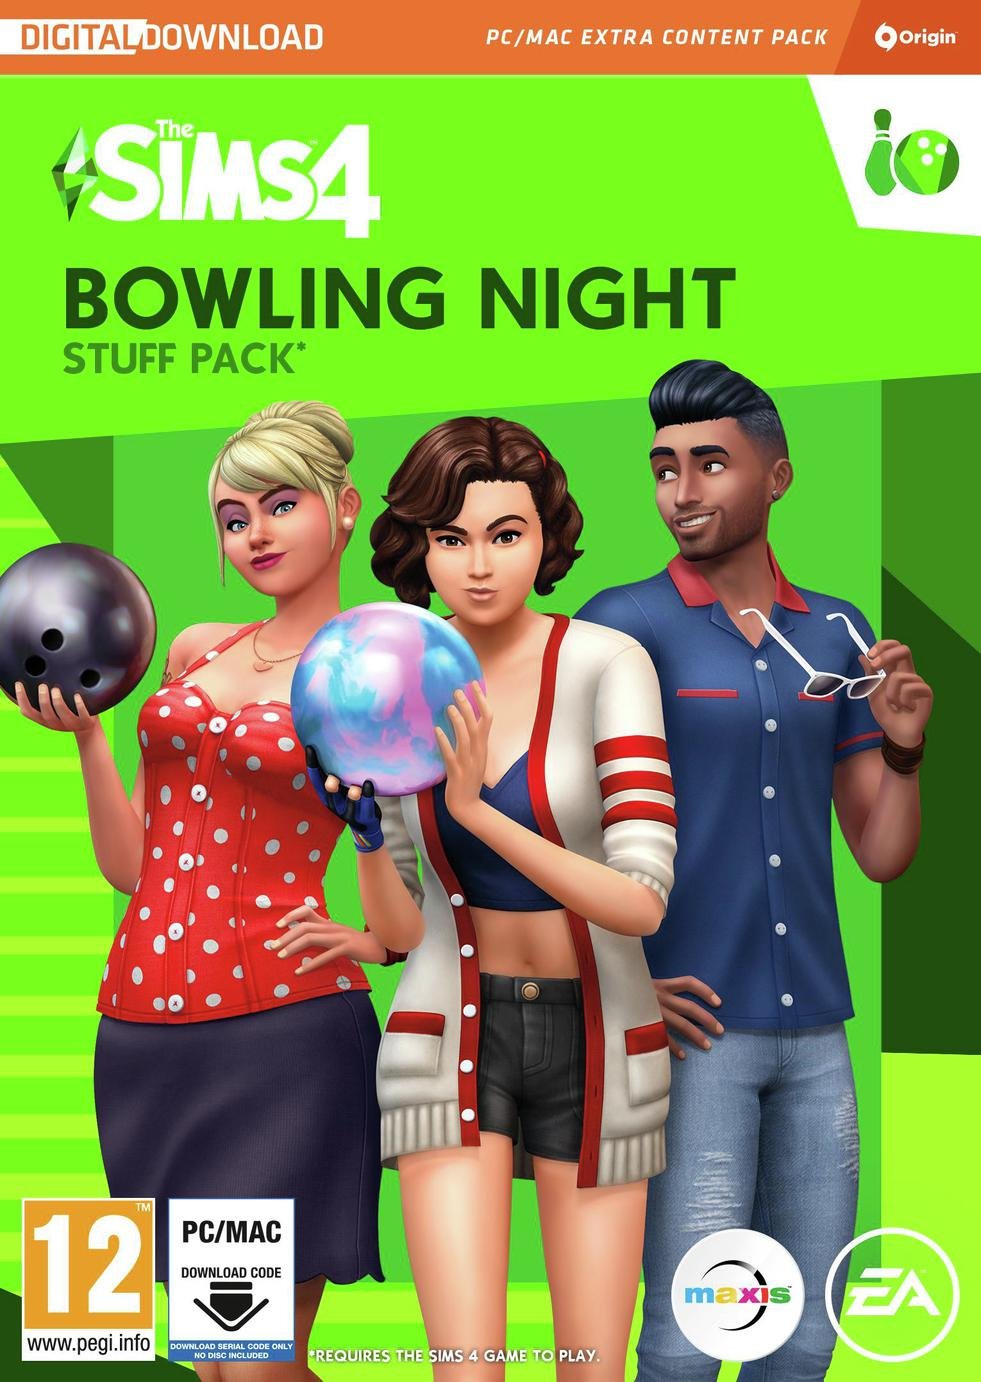 The Sims 4 Bowling Night Stuff Pack PC Game